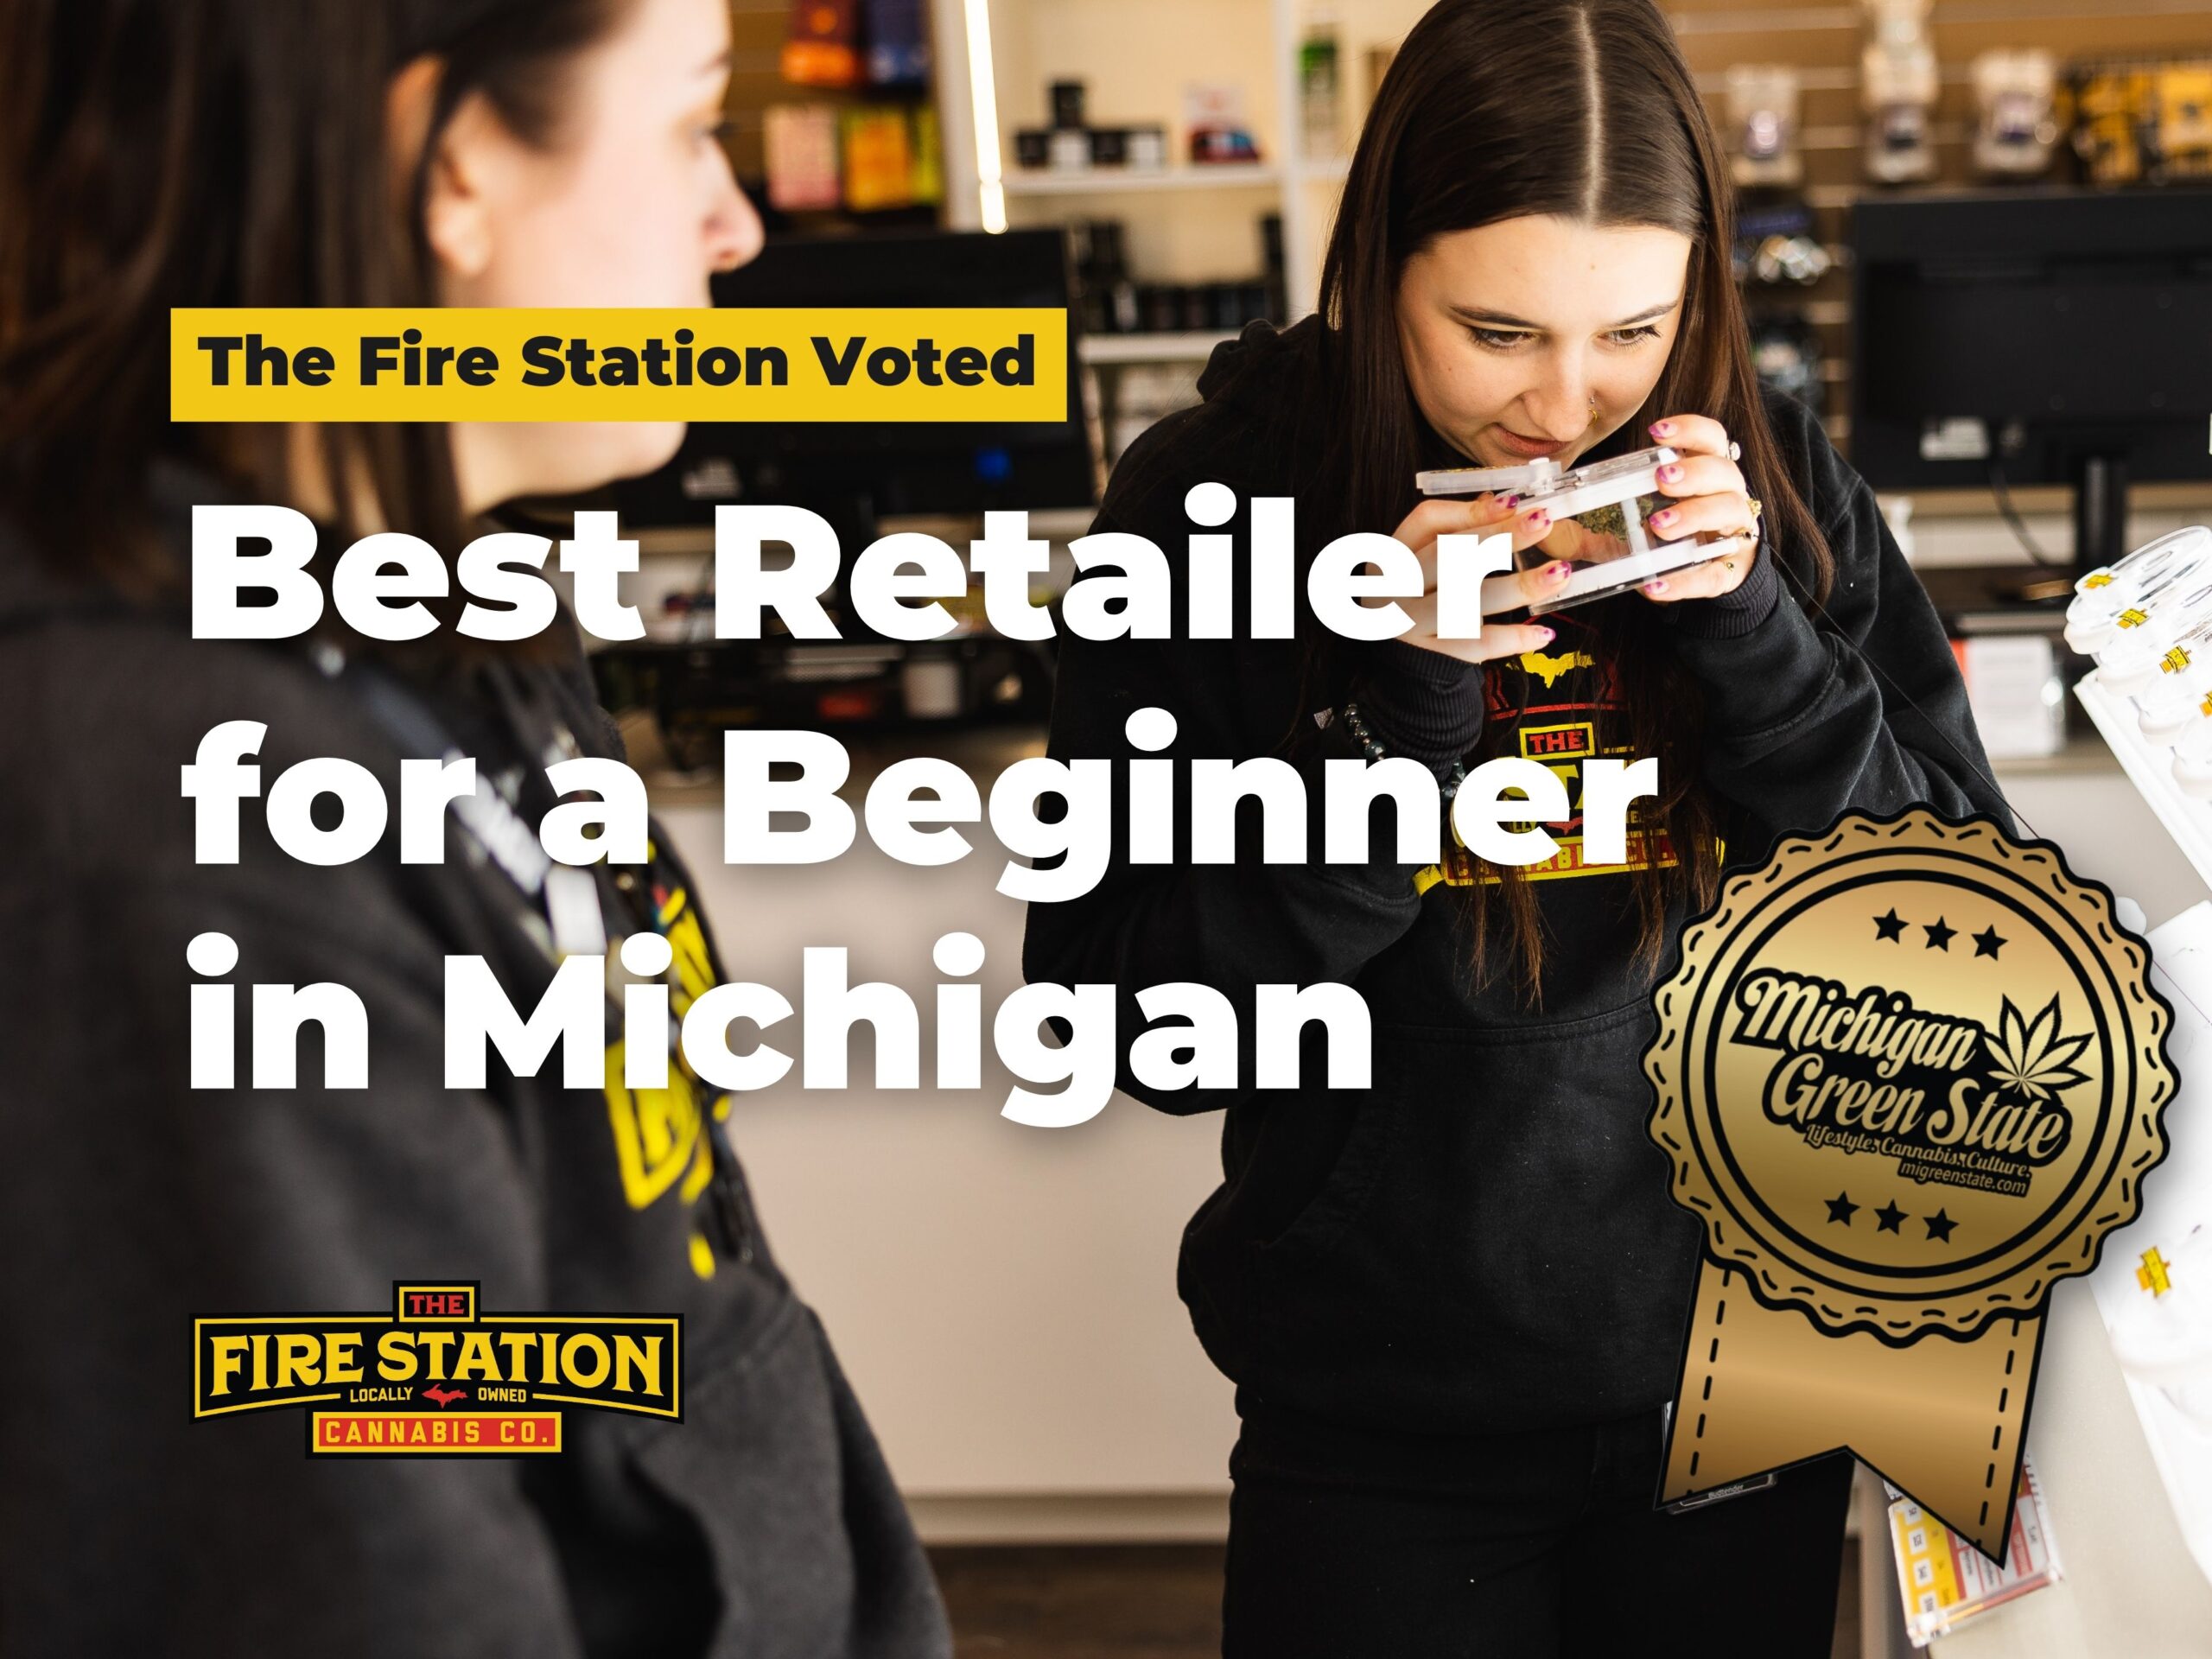 The Fire Station Voted ‘Best Retailer for a Beginner’ in Michigan